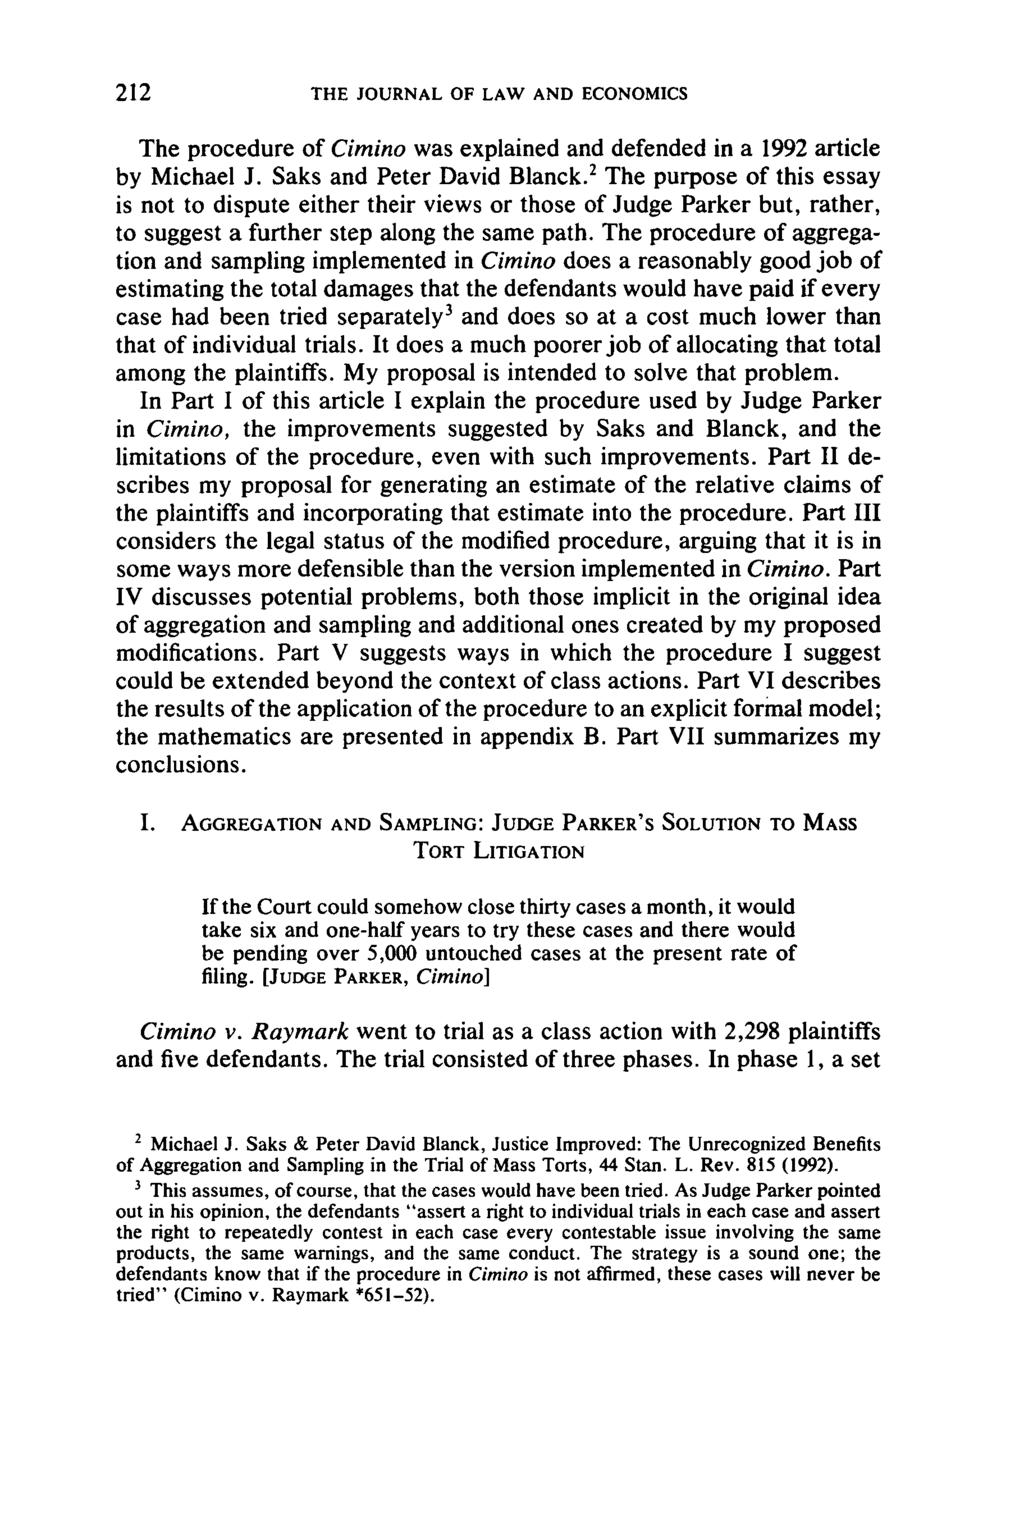 THE JOURNAL OF LAW AND ECONOMICS The procedure of Cimino was explained and defended in a 1992 article by Michael J. Saks and Peter David Blanck.